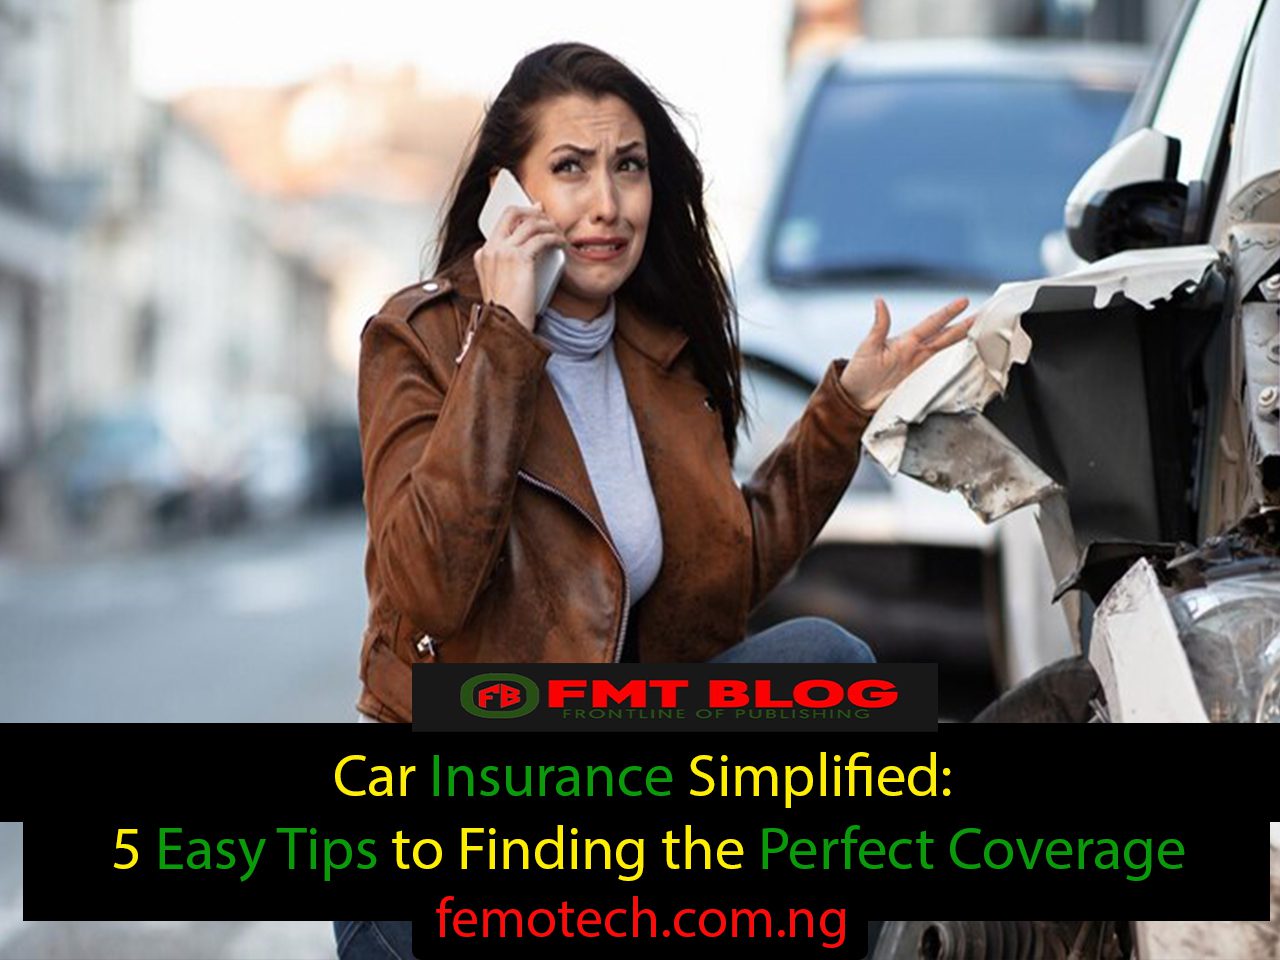 Car Insurance Simplified: 5 Easy Tips to Finding the Perfect Coverage